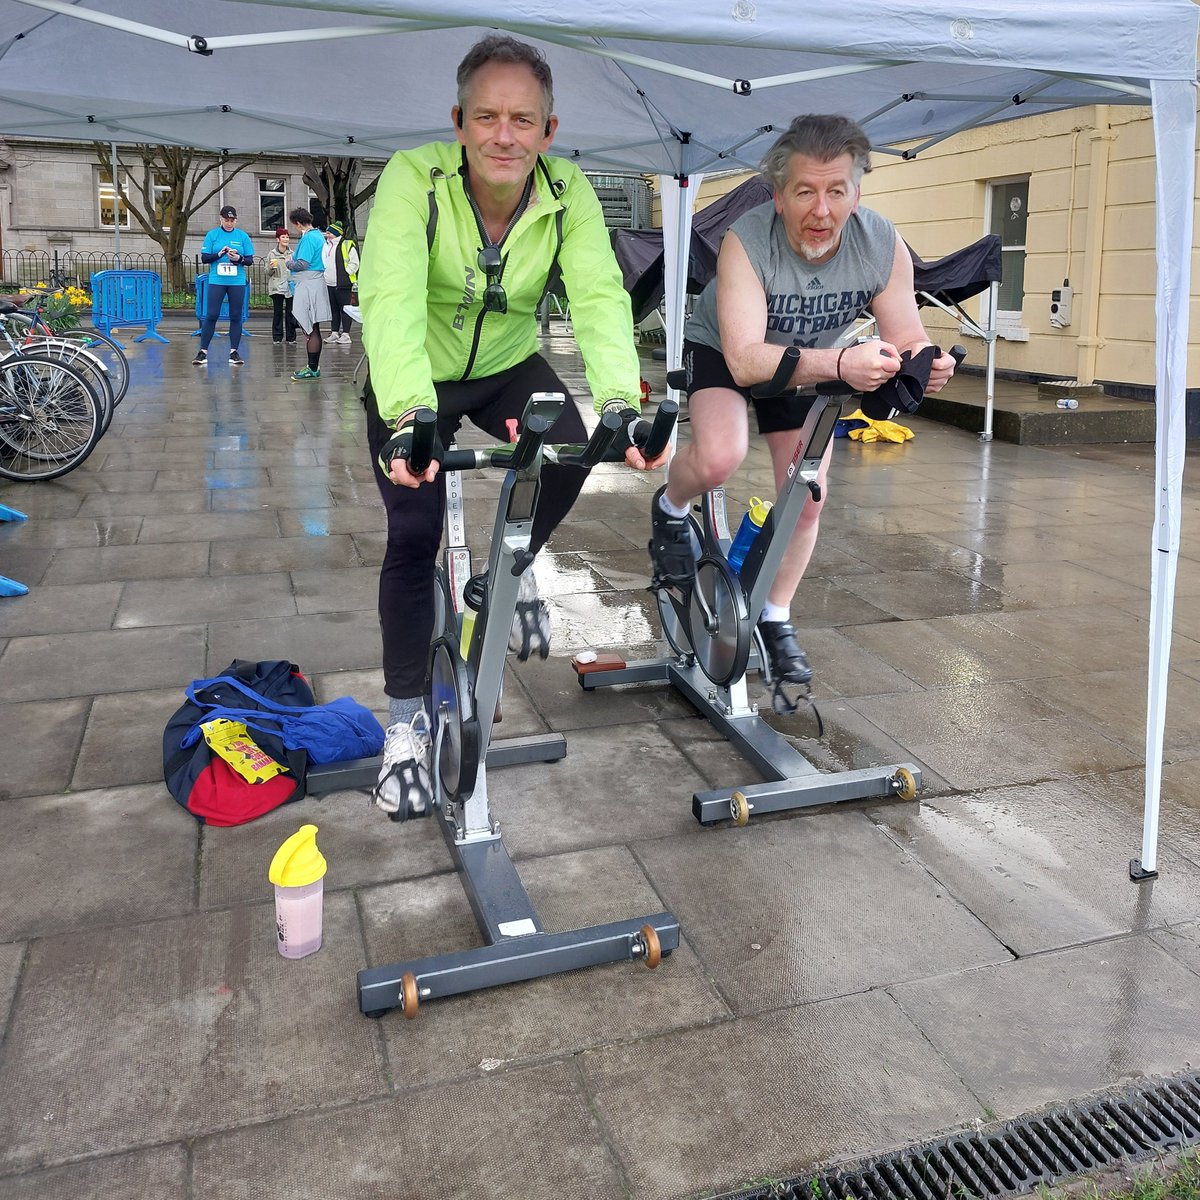 Our Registrar Neville Cox is putting his muscles where his mouth is today on a twelve-hour stationary bike ride as part of #TrinityOnTheMove in aid of the Trinity Student Hardship Fund. Donate here tcd.ie/alumni/inspiri… because, today, he's a #CashRegistrar 😜